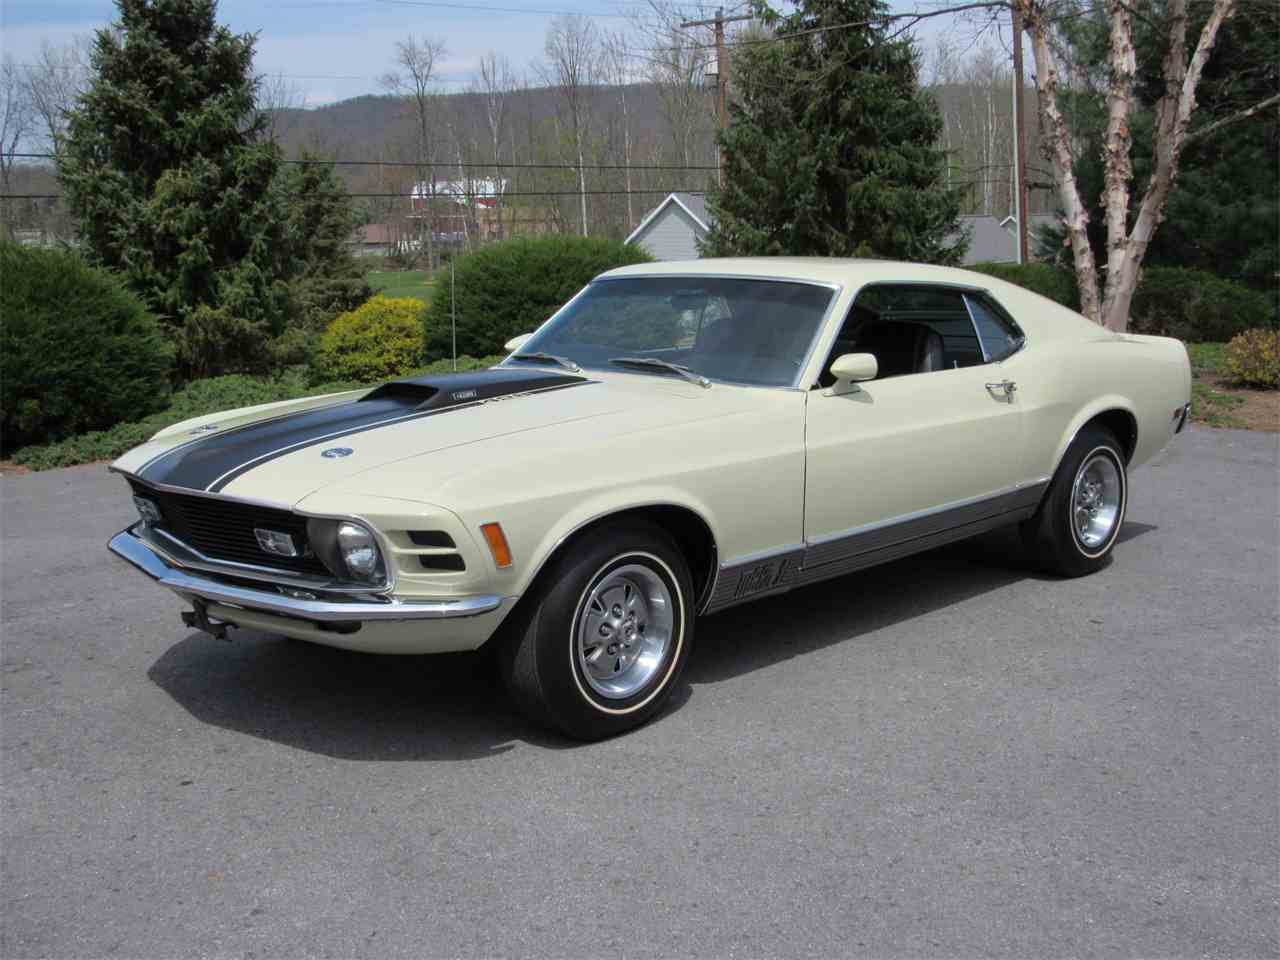 1970 Ford Mustang Mach 1 for Sale | ClassicCars.com | CC-982179